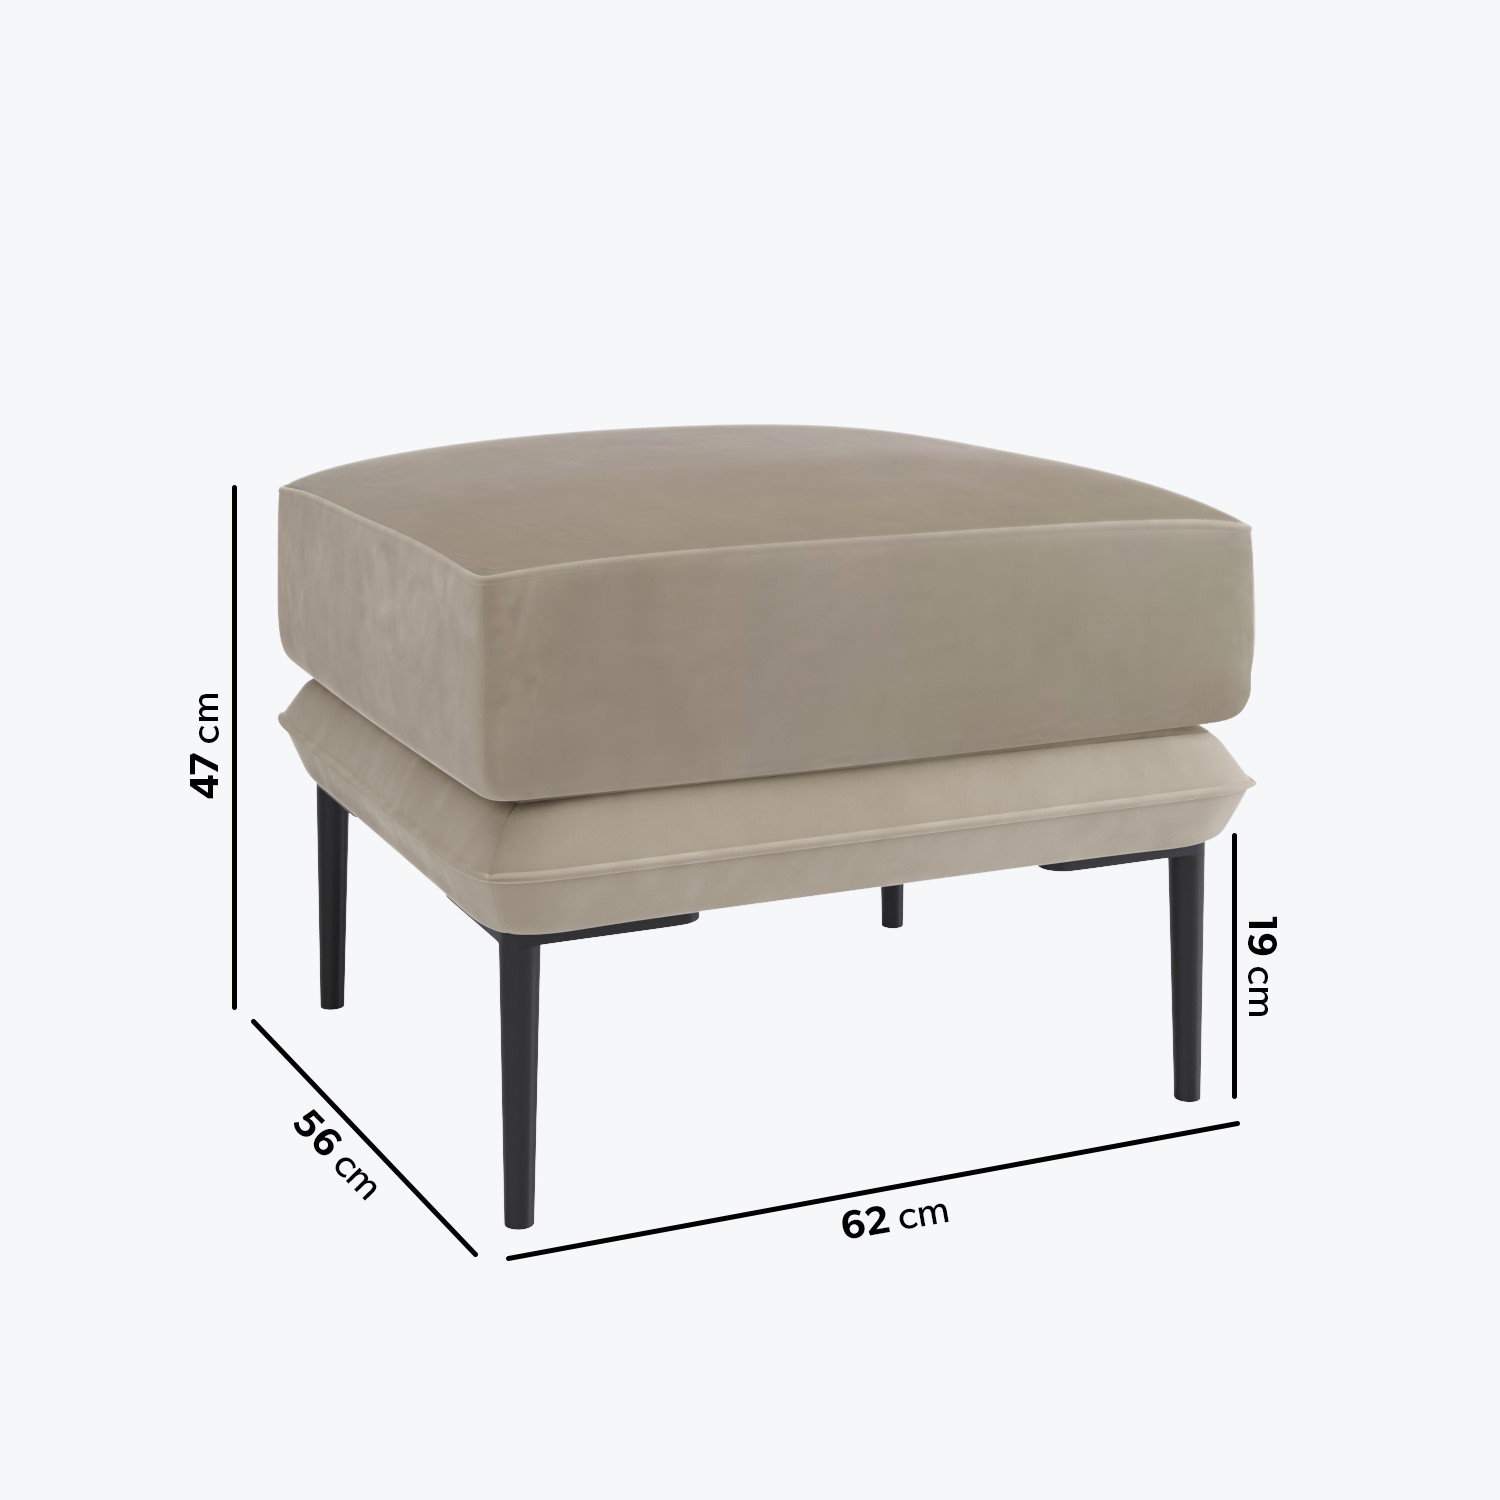 Read more about Small beige velvet footstool lenny